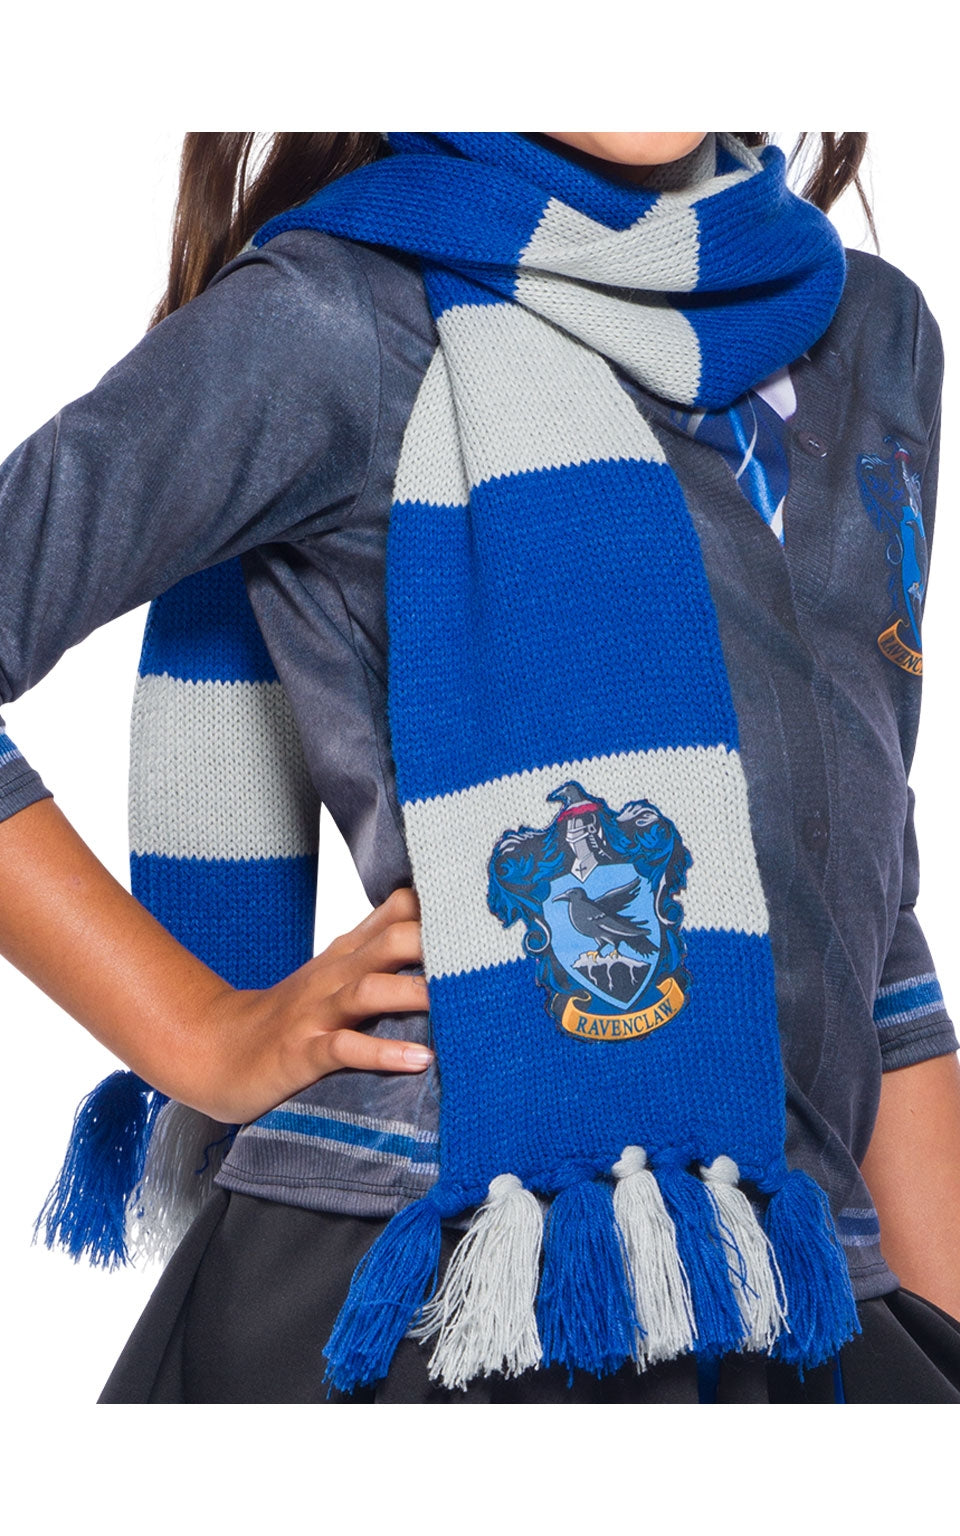 Official Deluxe Ravenclaw Scarf